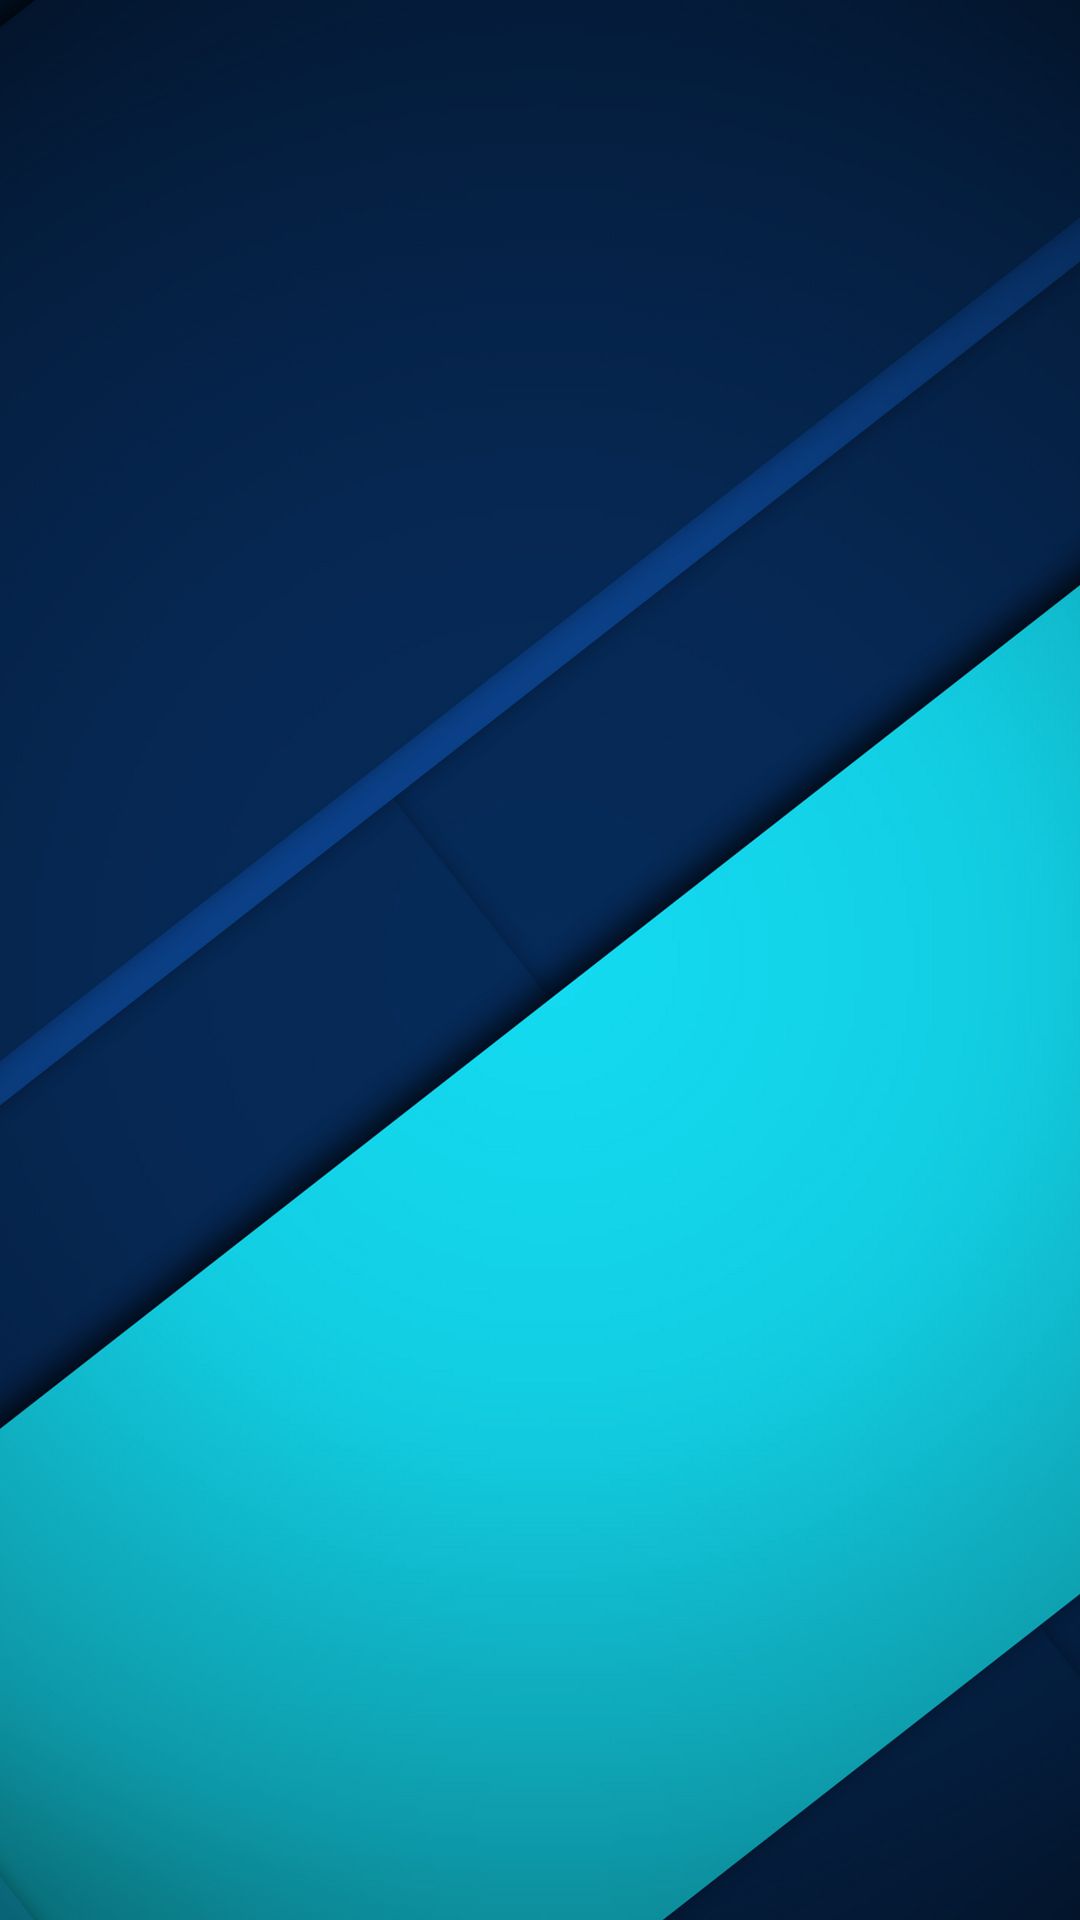 Modern Material Design Wallpaper and Abstract Background Image